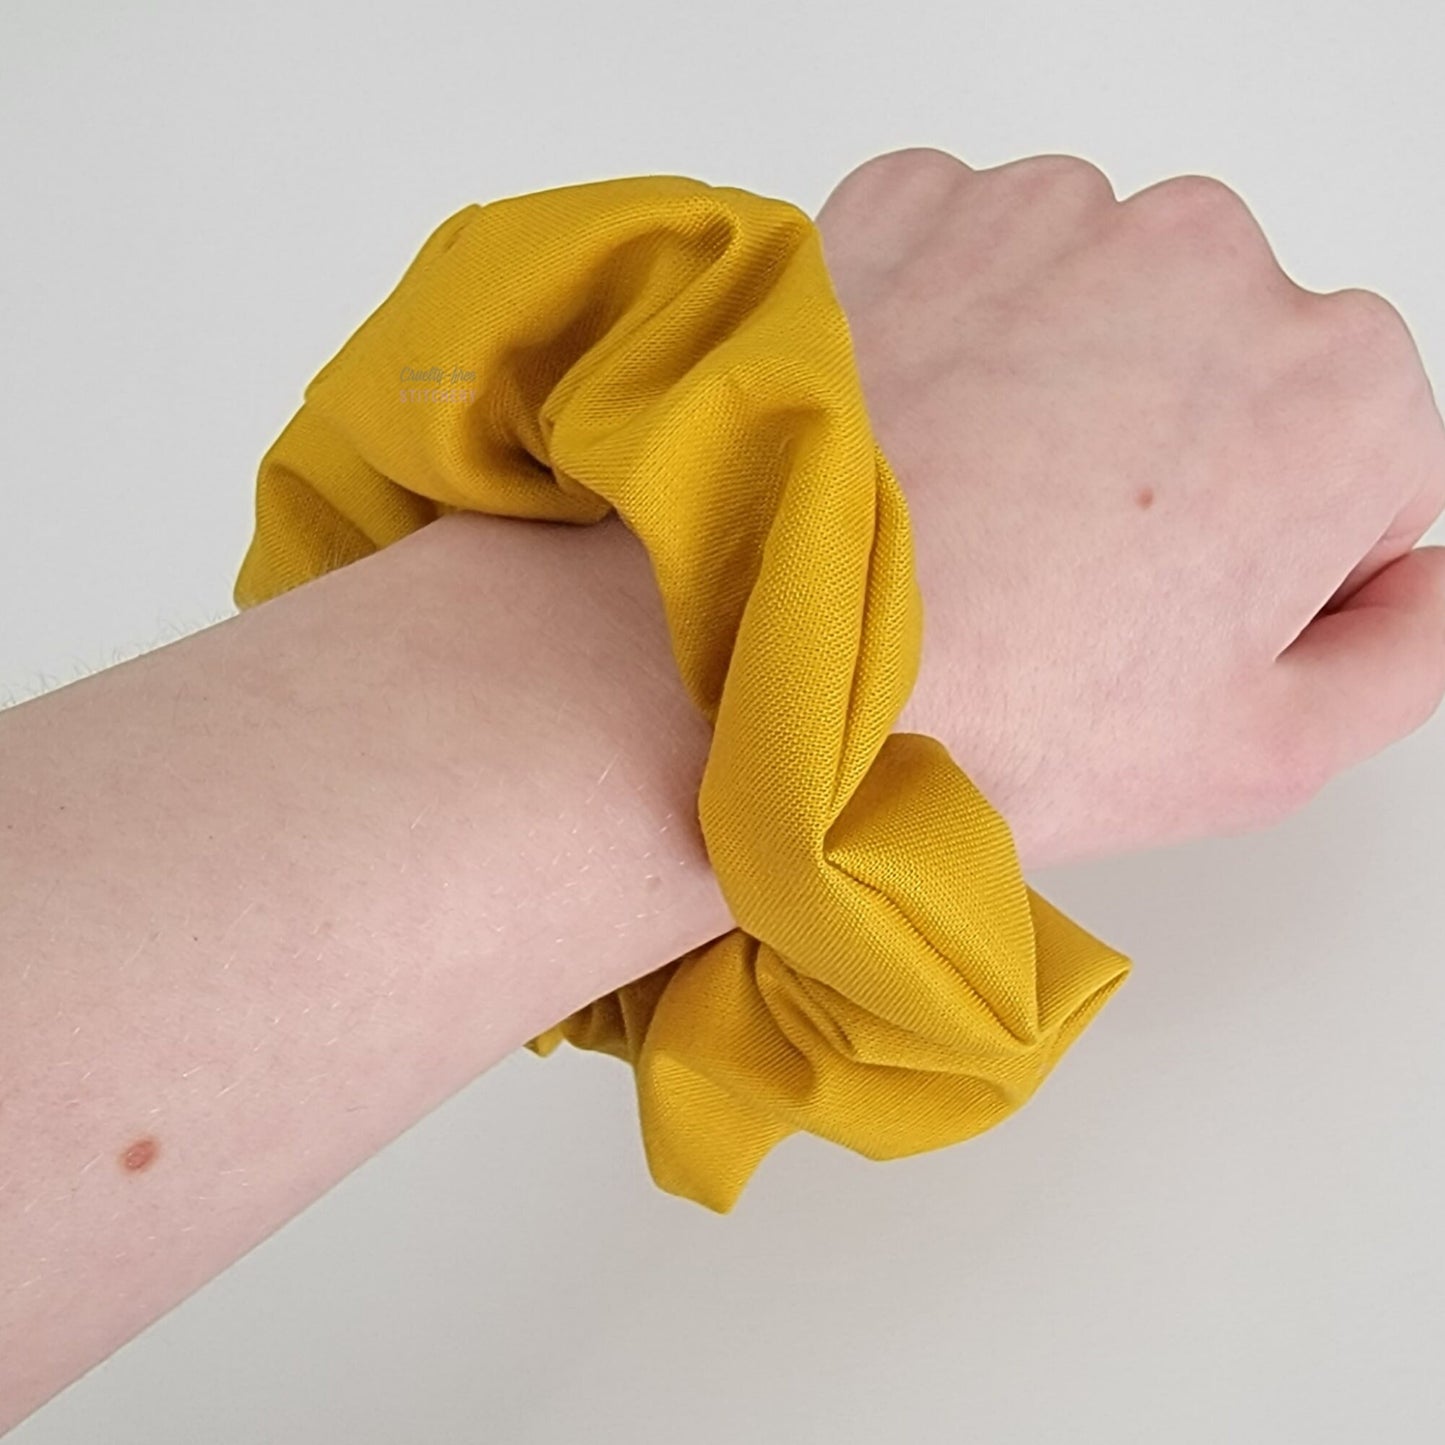 A mustard yellow scrunchie on my arm.